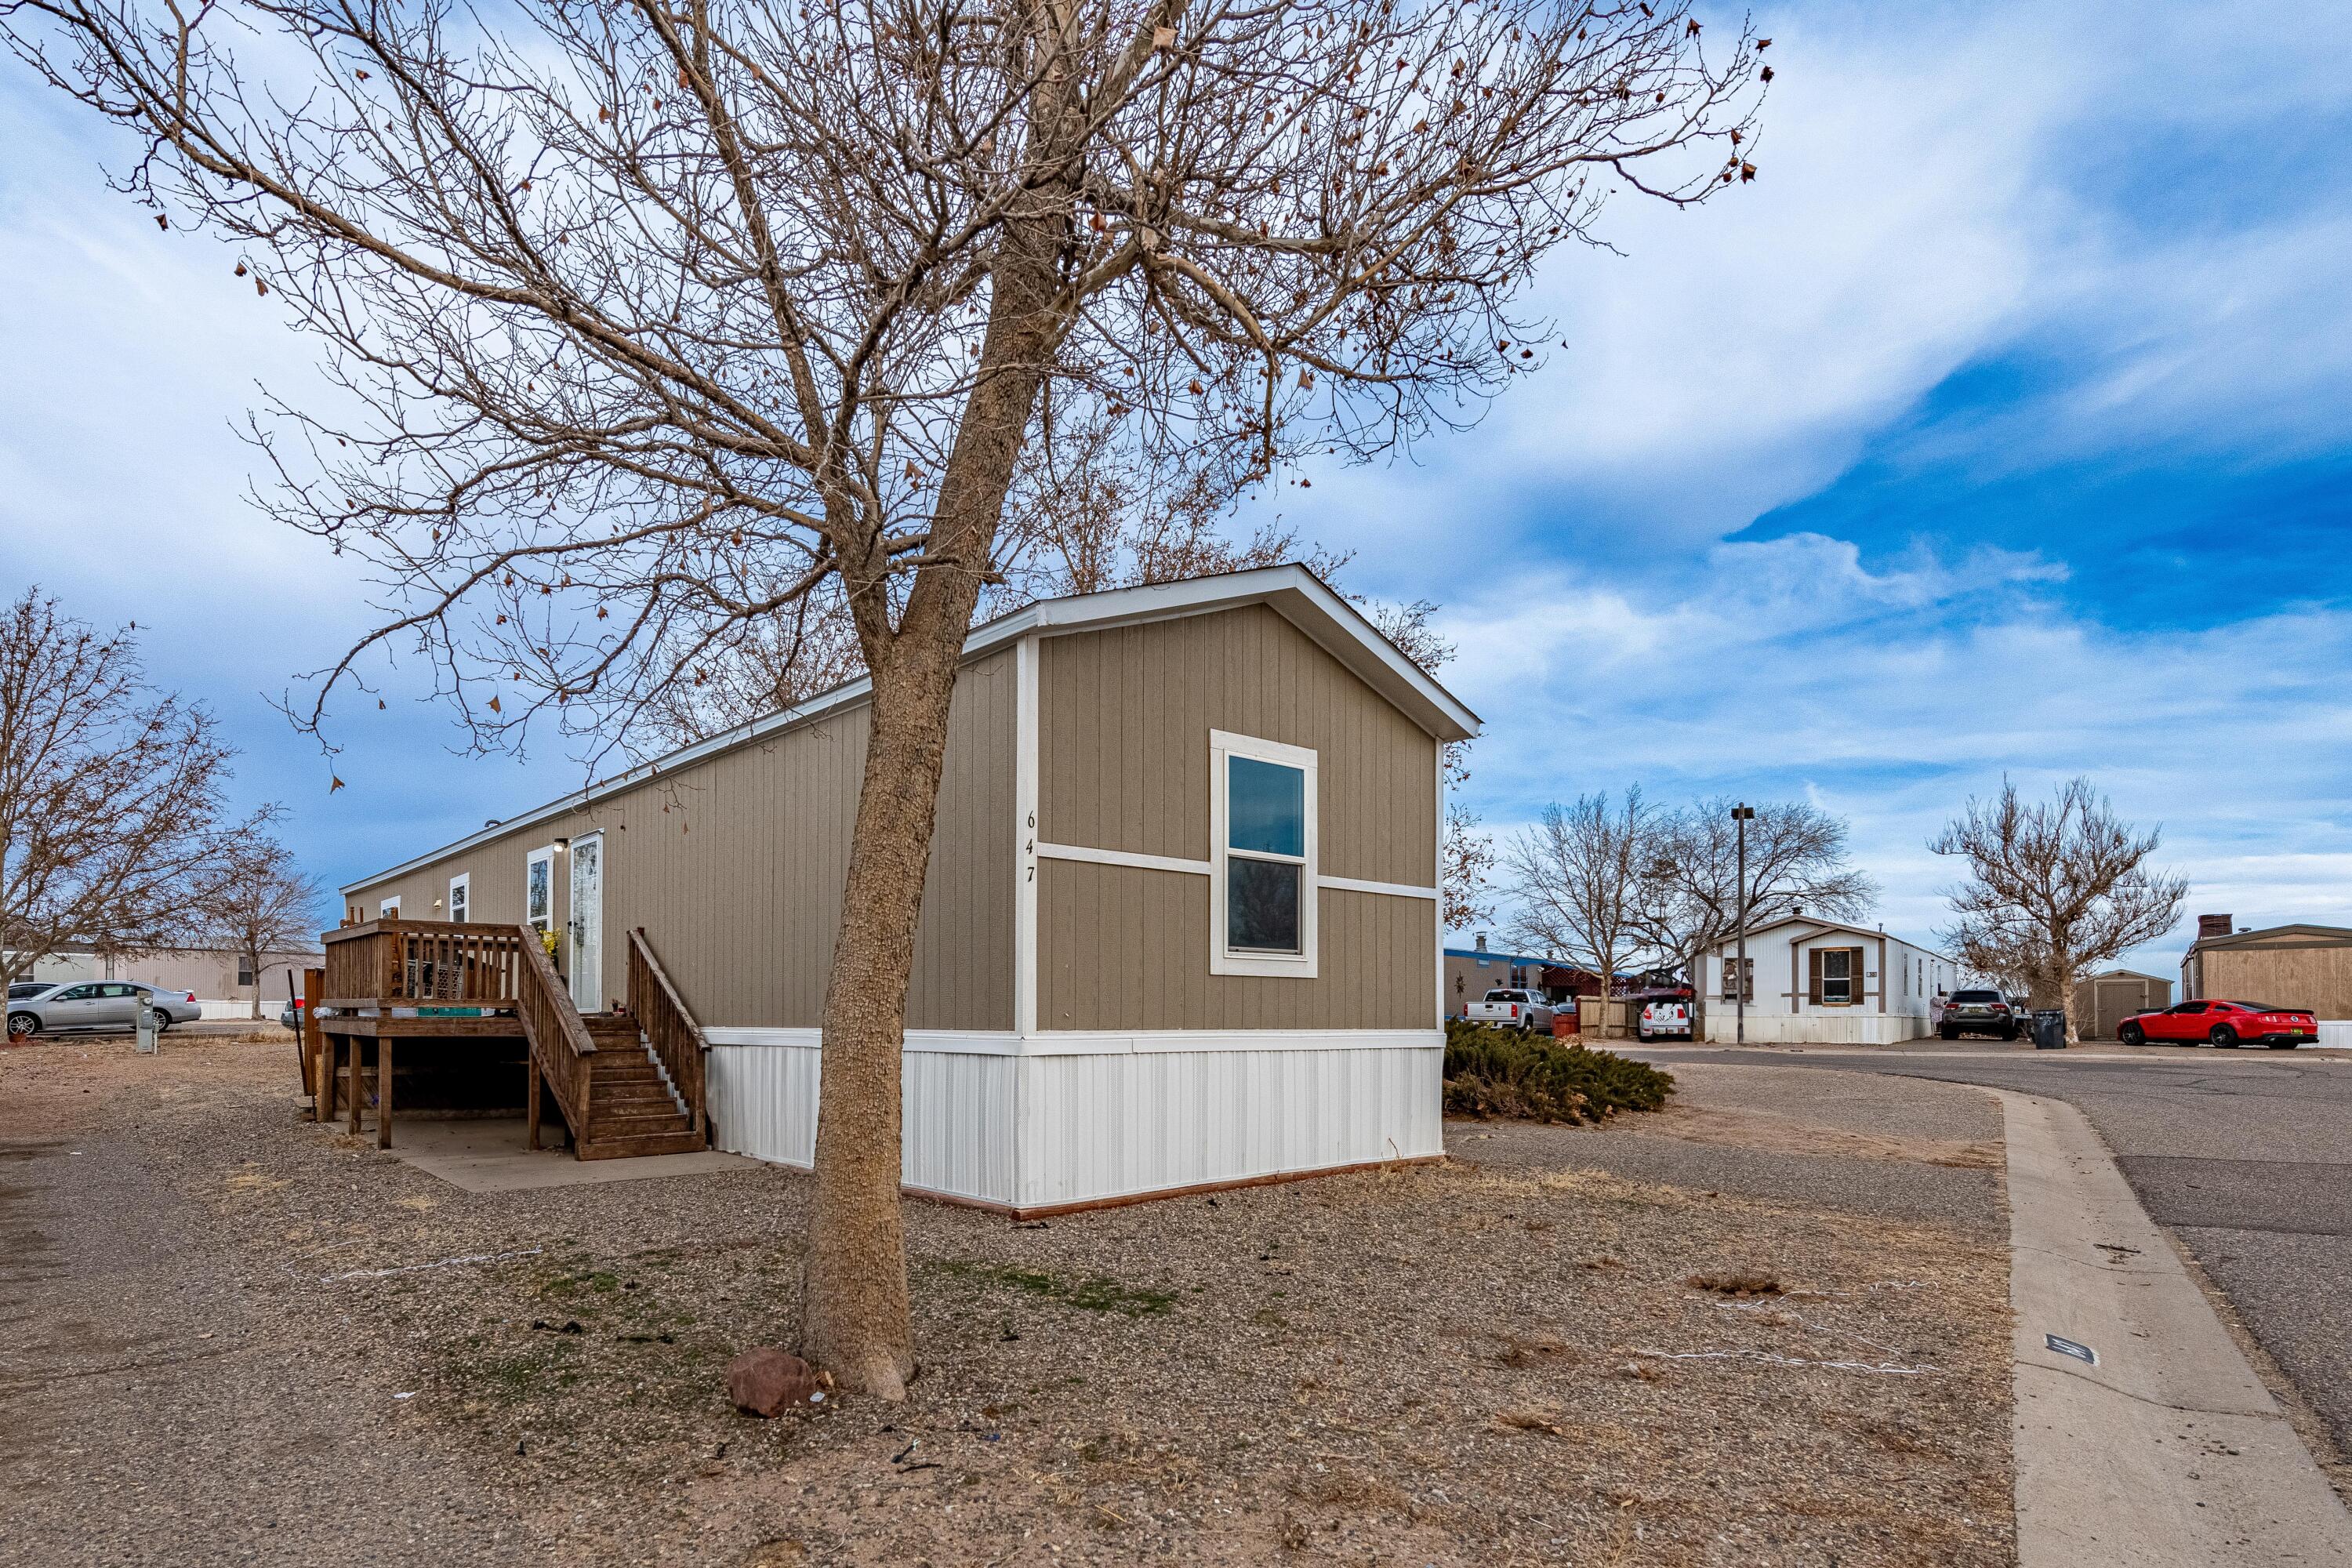 Really cozy starters three bedroom two bath mobile house, schedule your showing today!